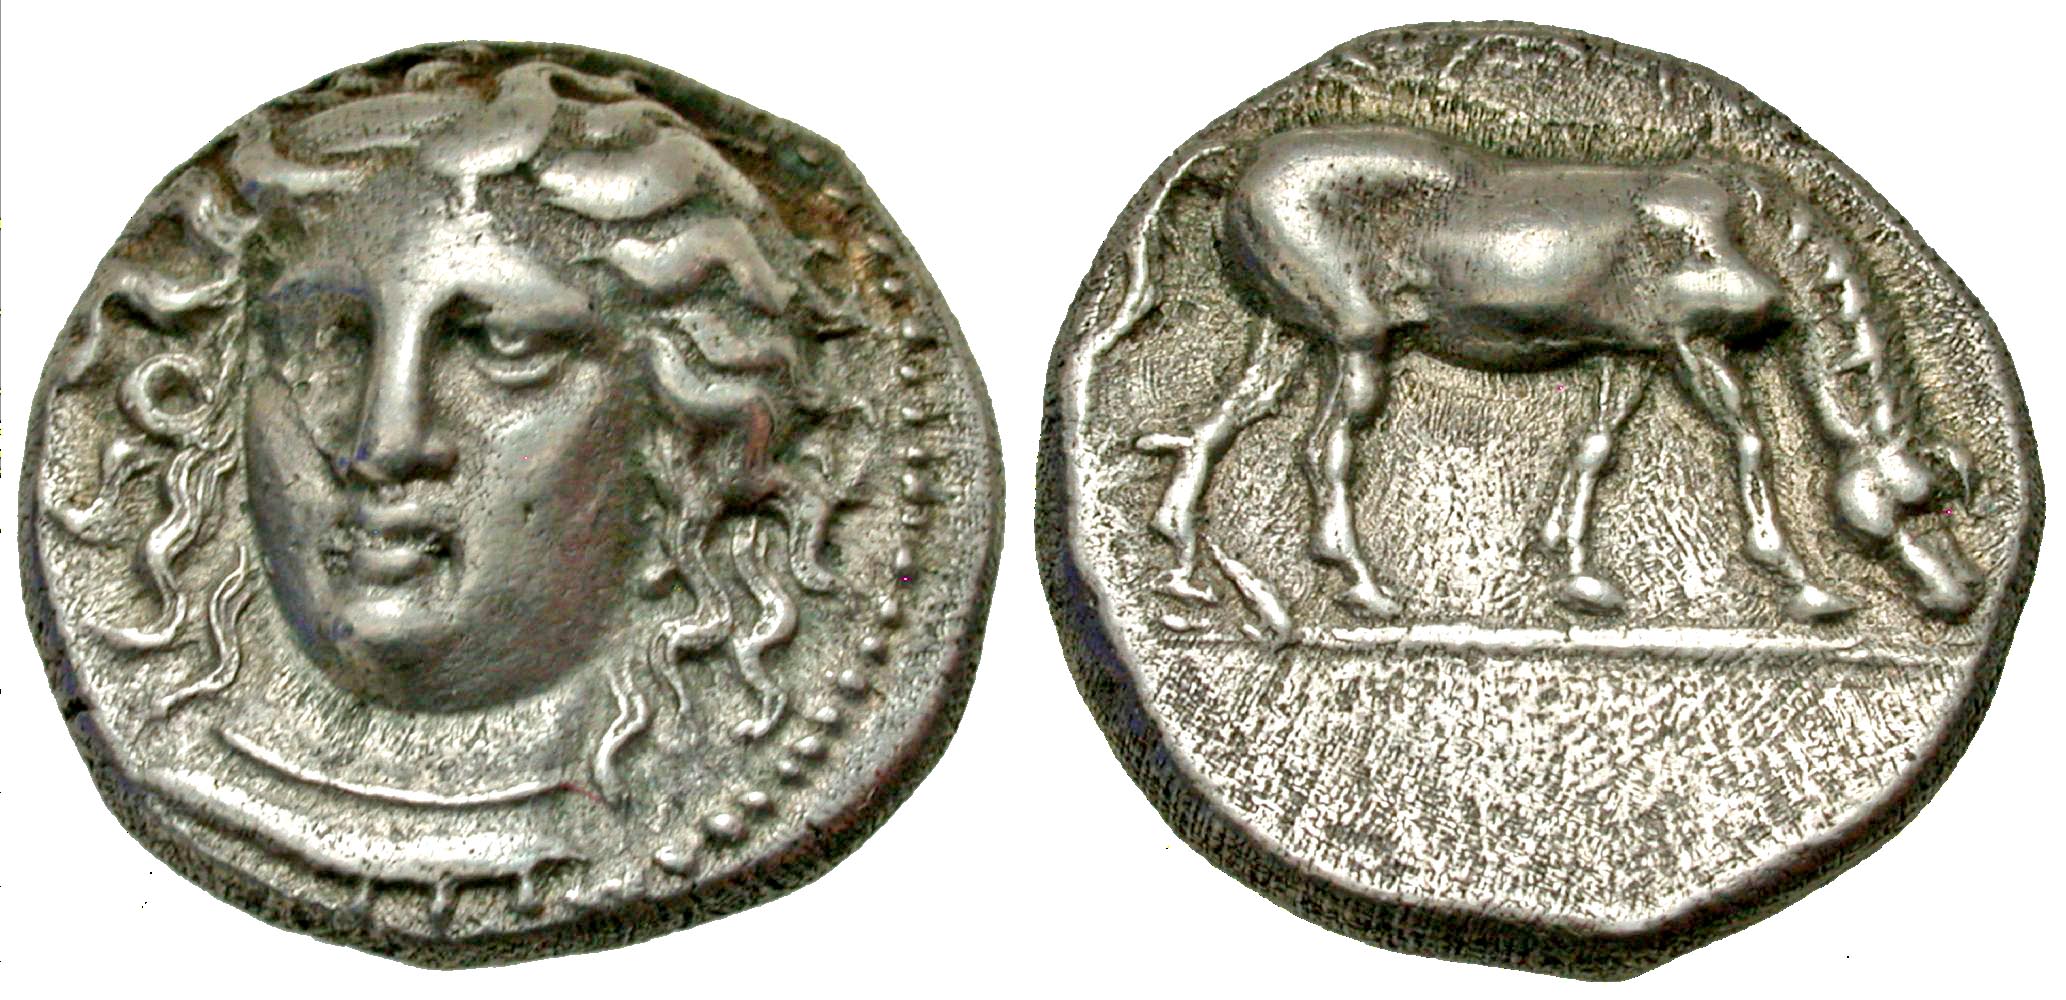 Thessaly, Larissa. Ca. 405-380 B.C. AR drachm. From the John Haer Collection. 